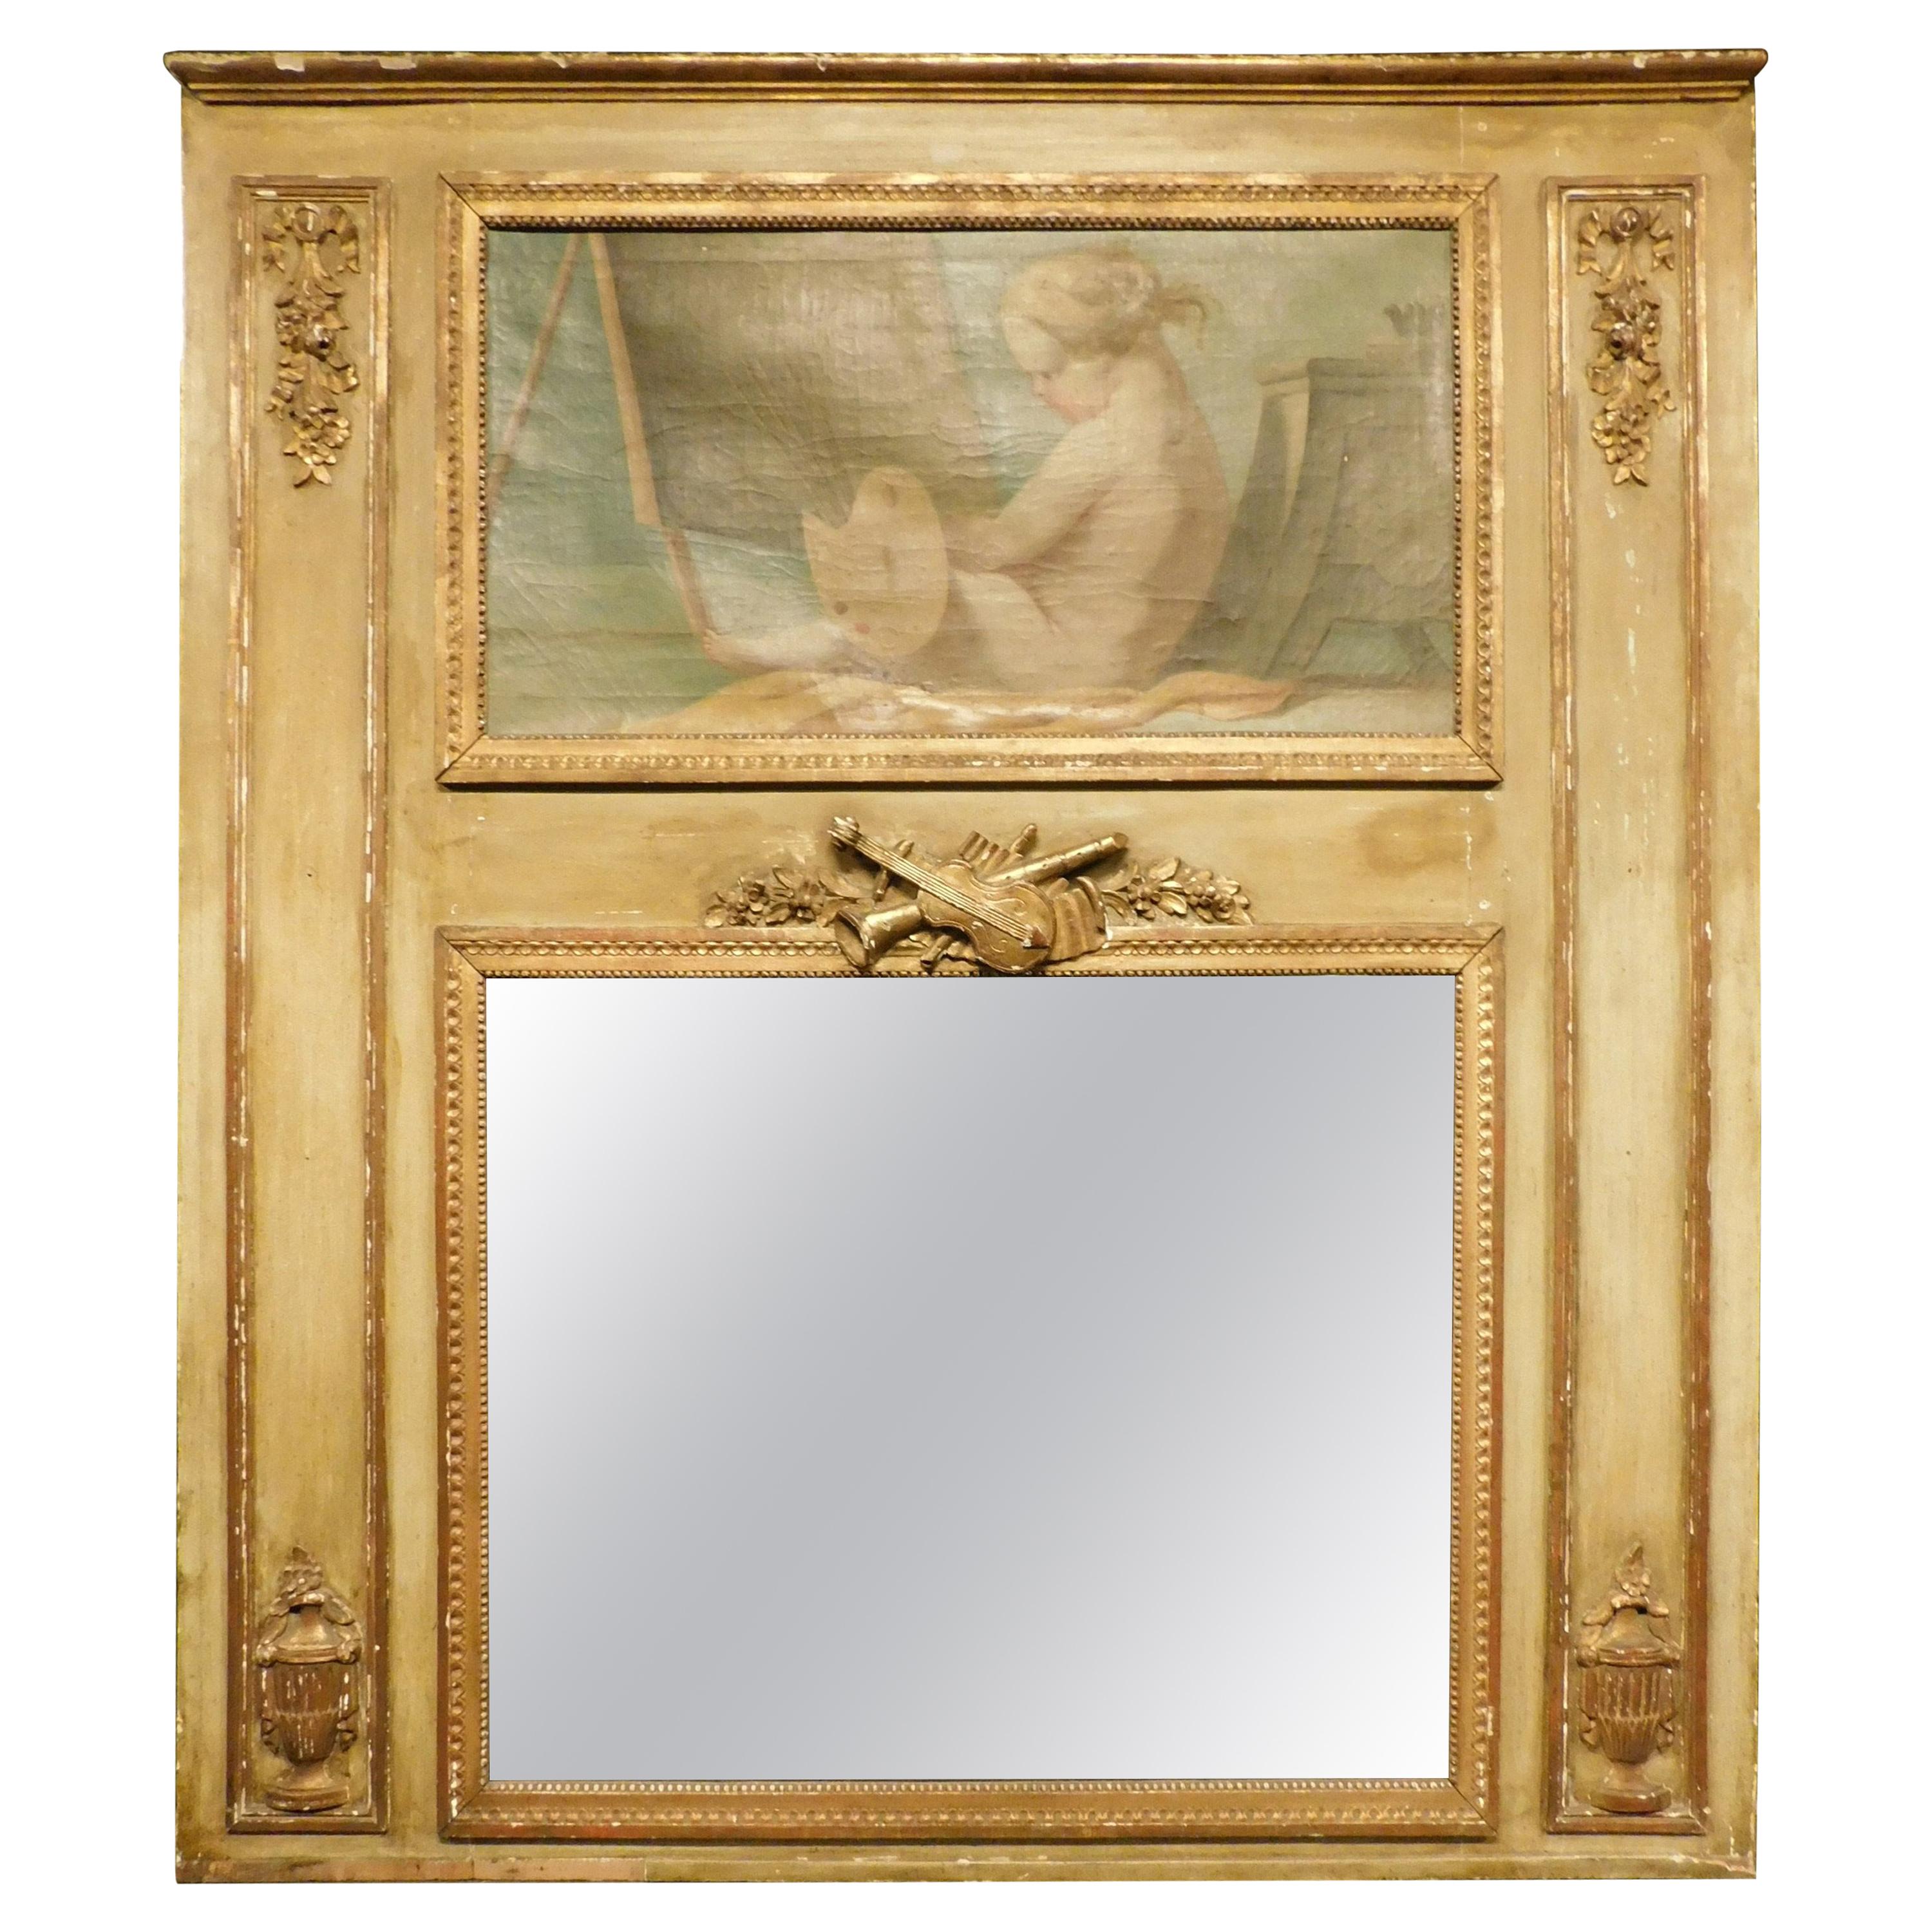 Antique Gilded Louis XVI Mirror with Painting, Inspired by Art, France, 1700